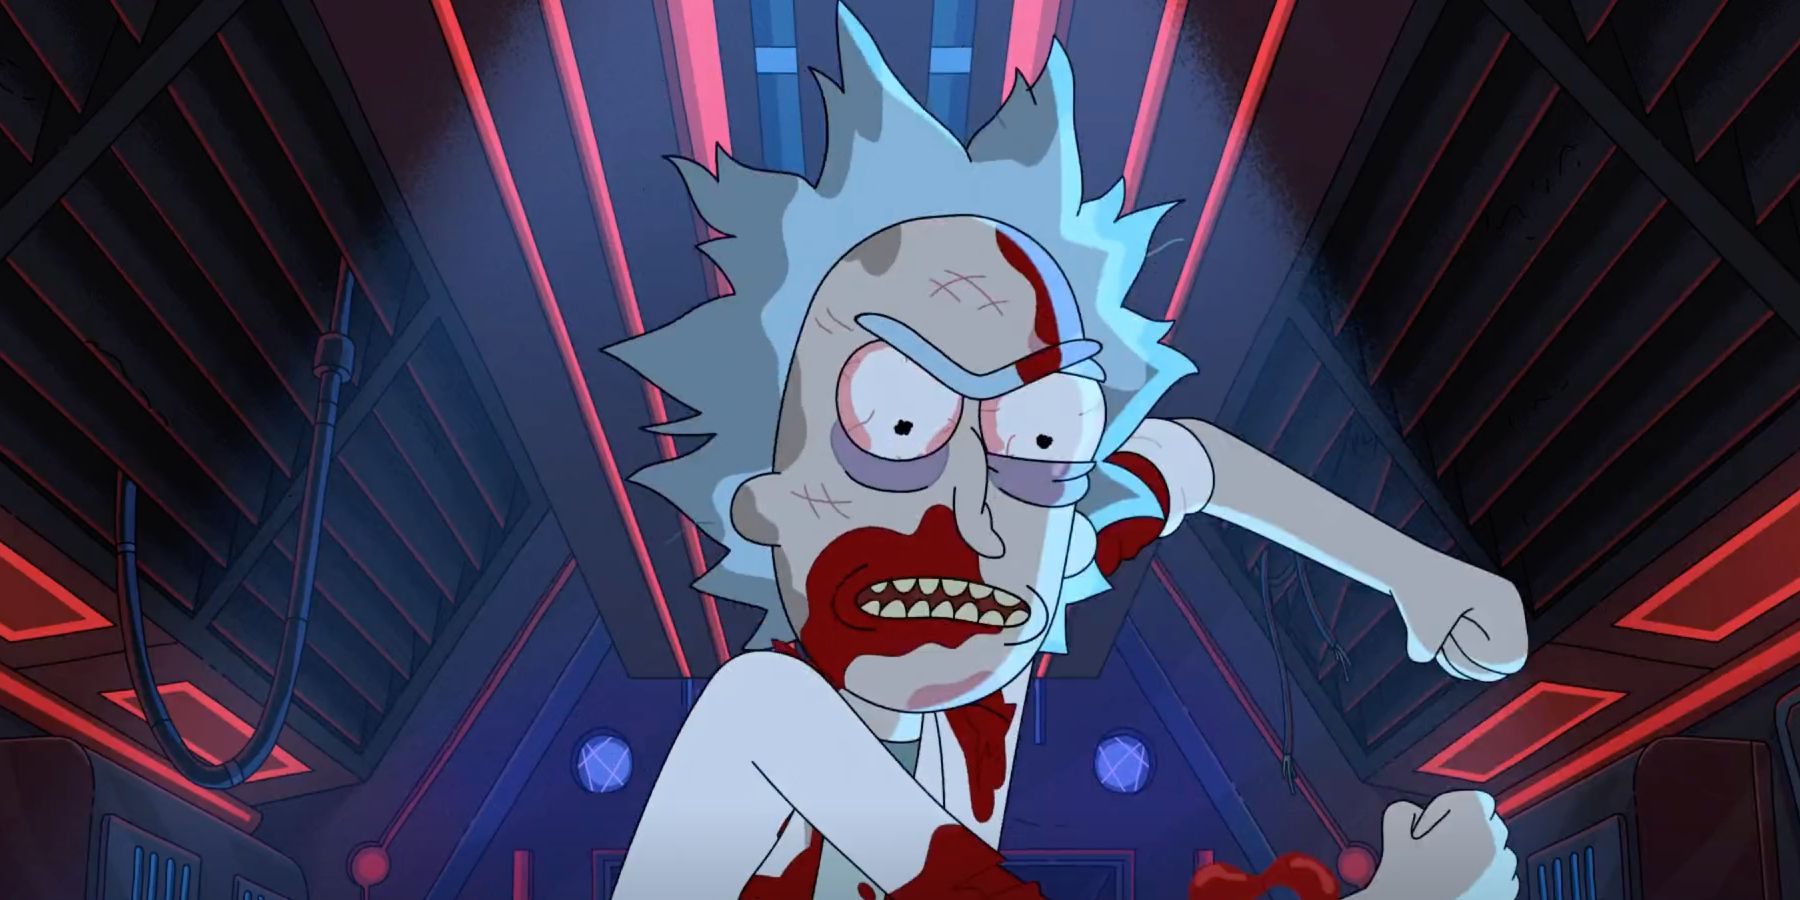 Rick and Morty season 7 ending explained: What happened to Rick?